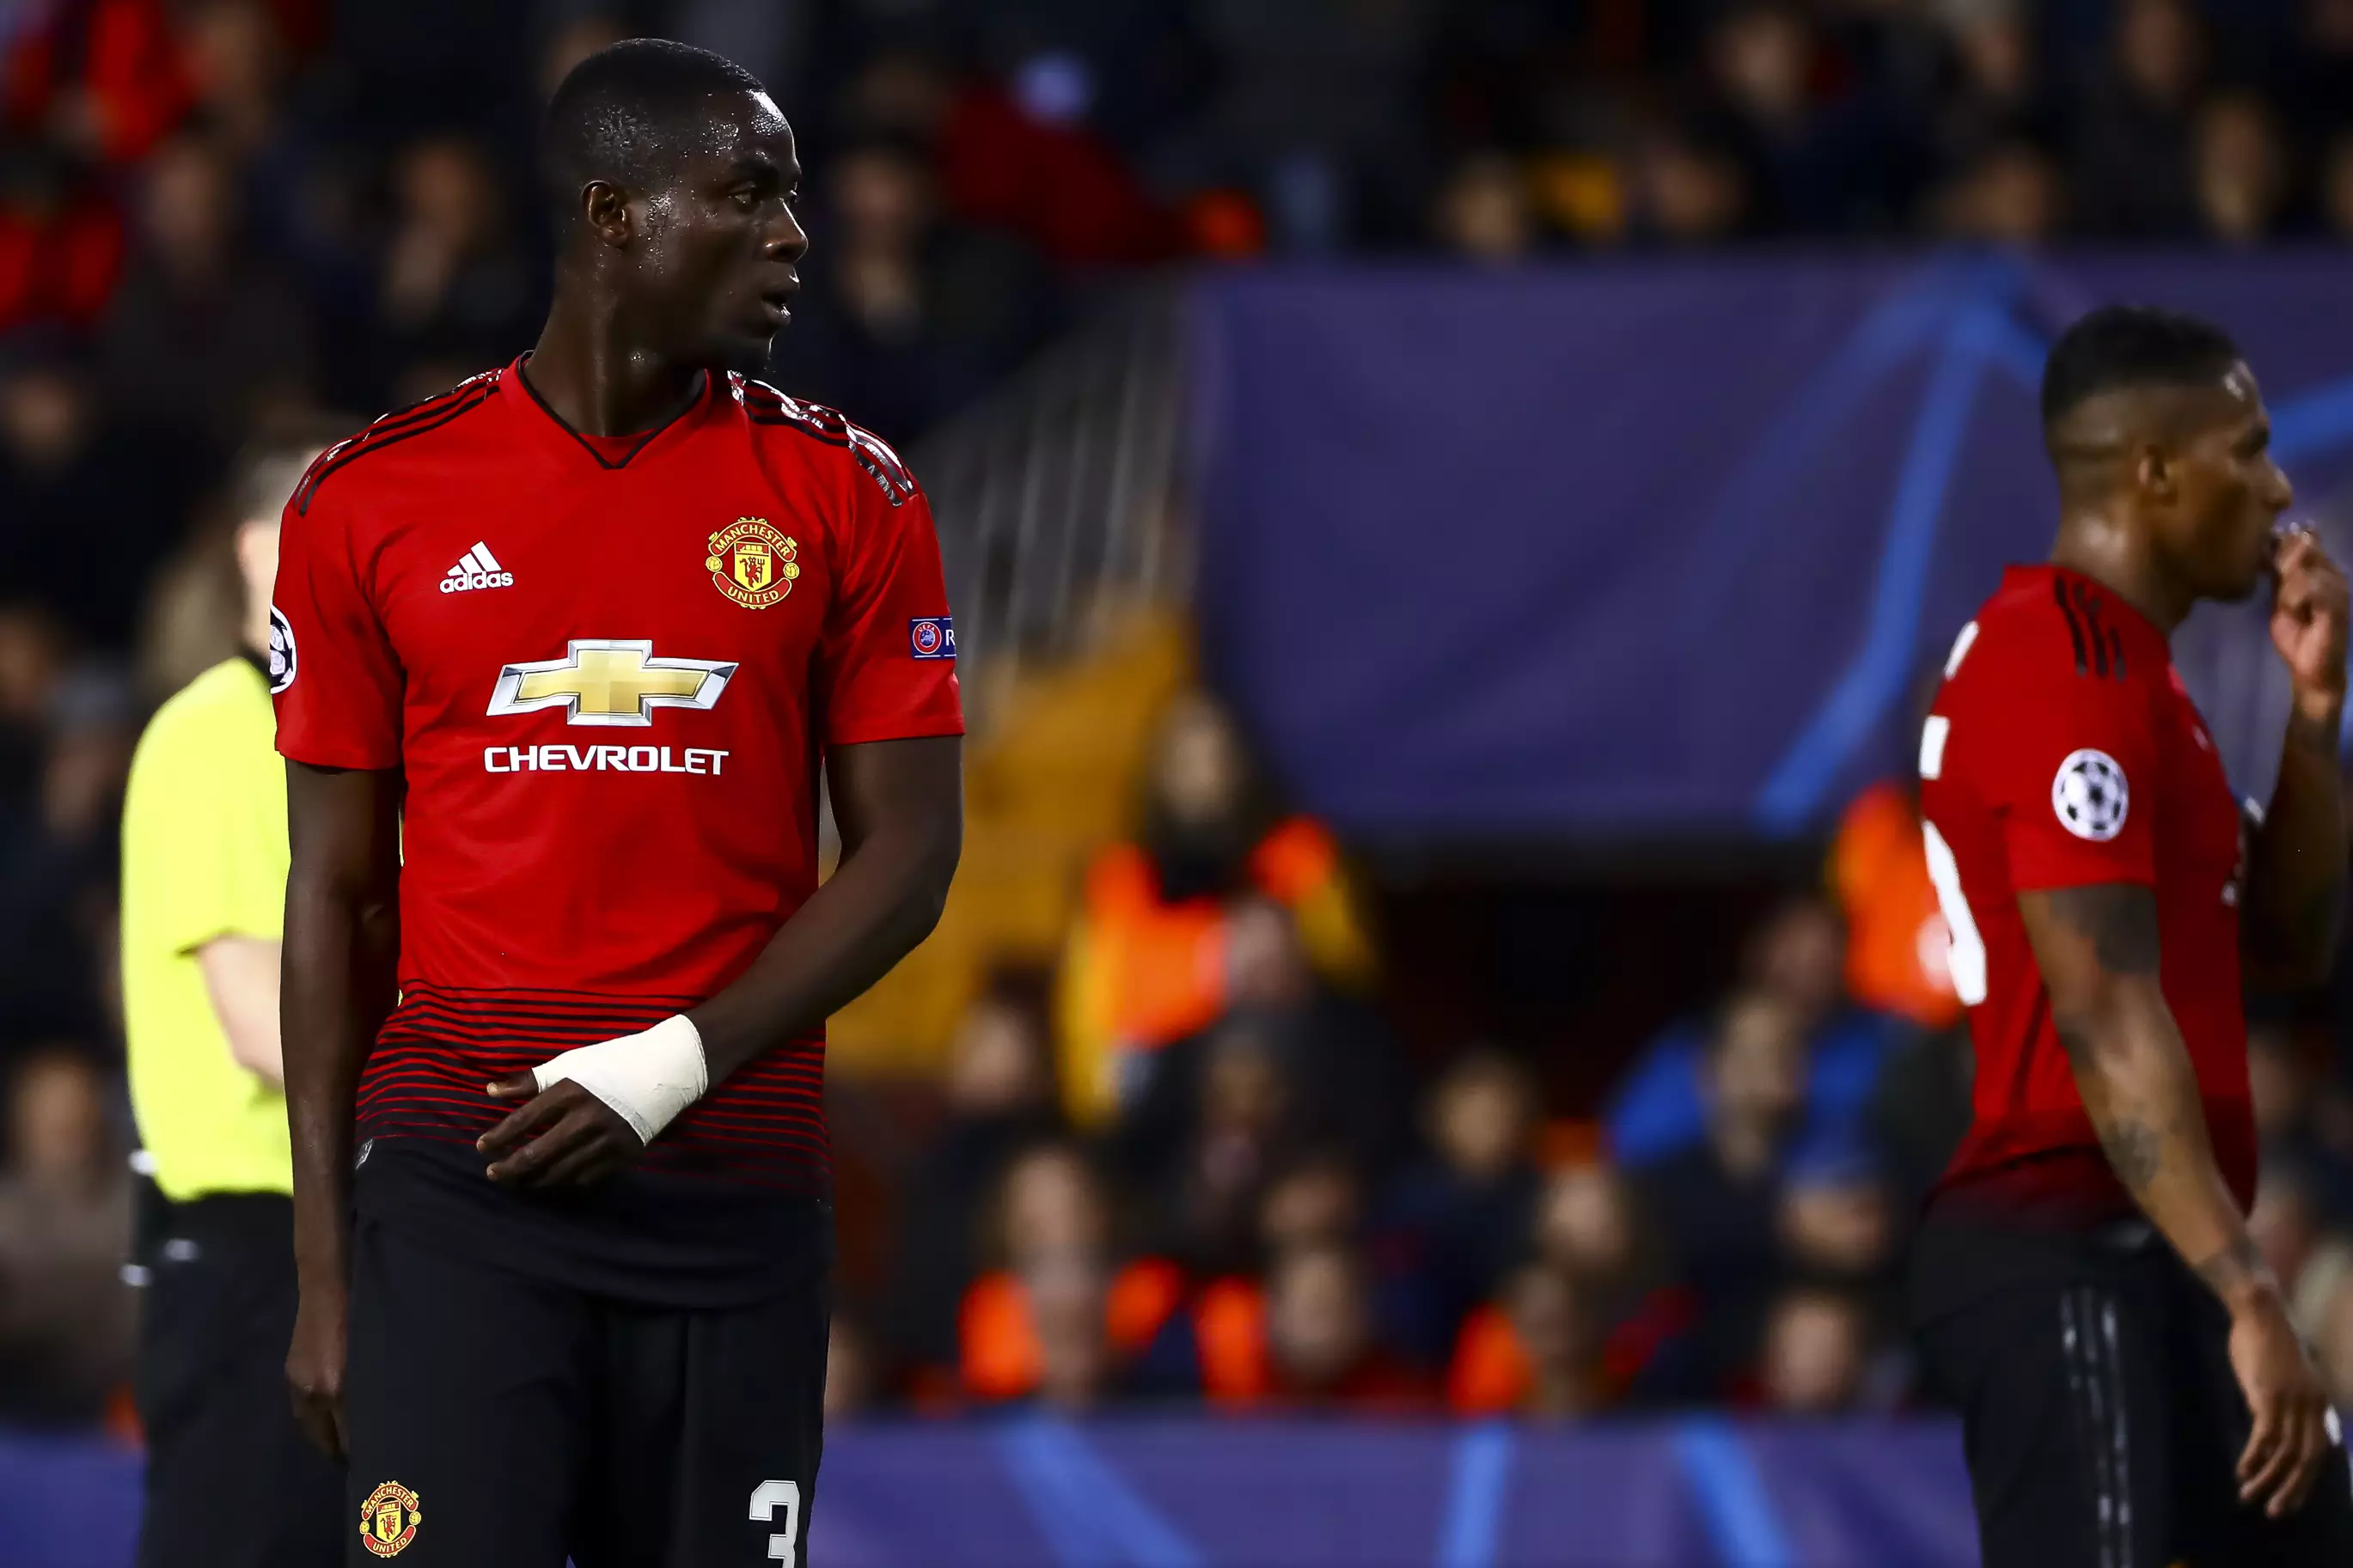 Bailly hasn't played much under Solskjaer. Image: PA Images